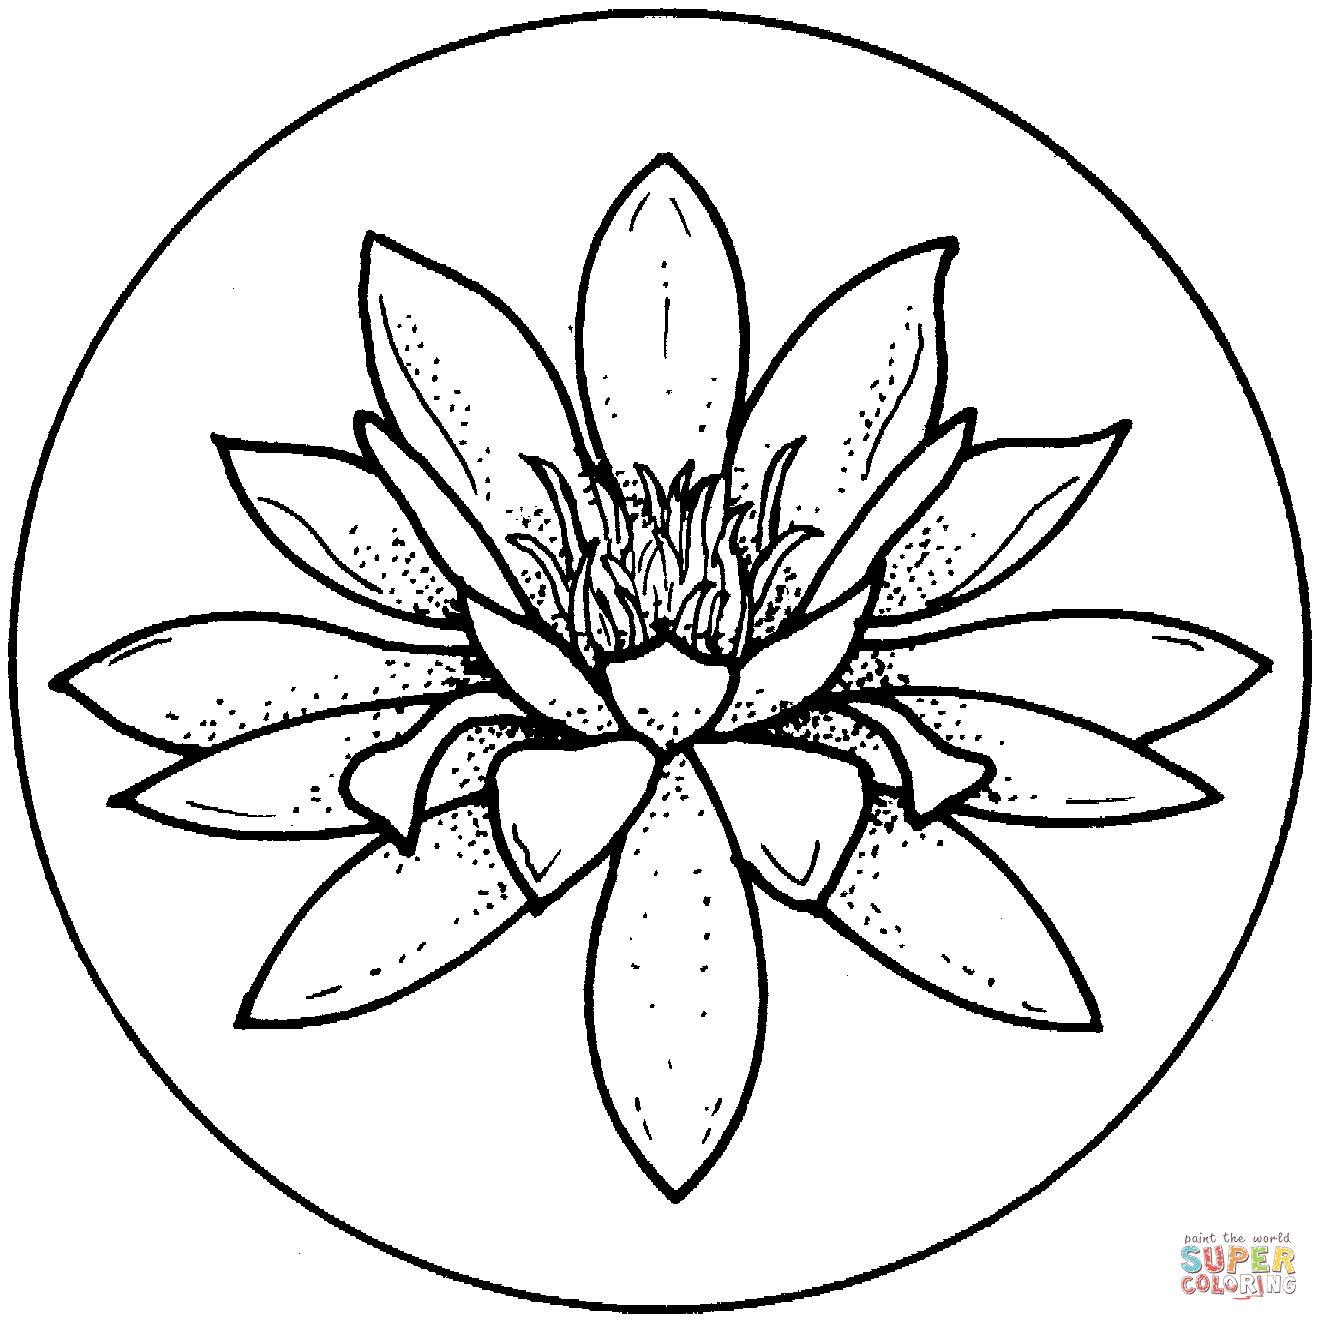 Water Lily 6 coloring page | Free Printable Coloring Pages